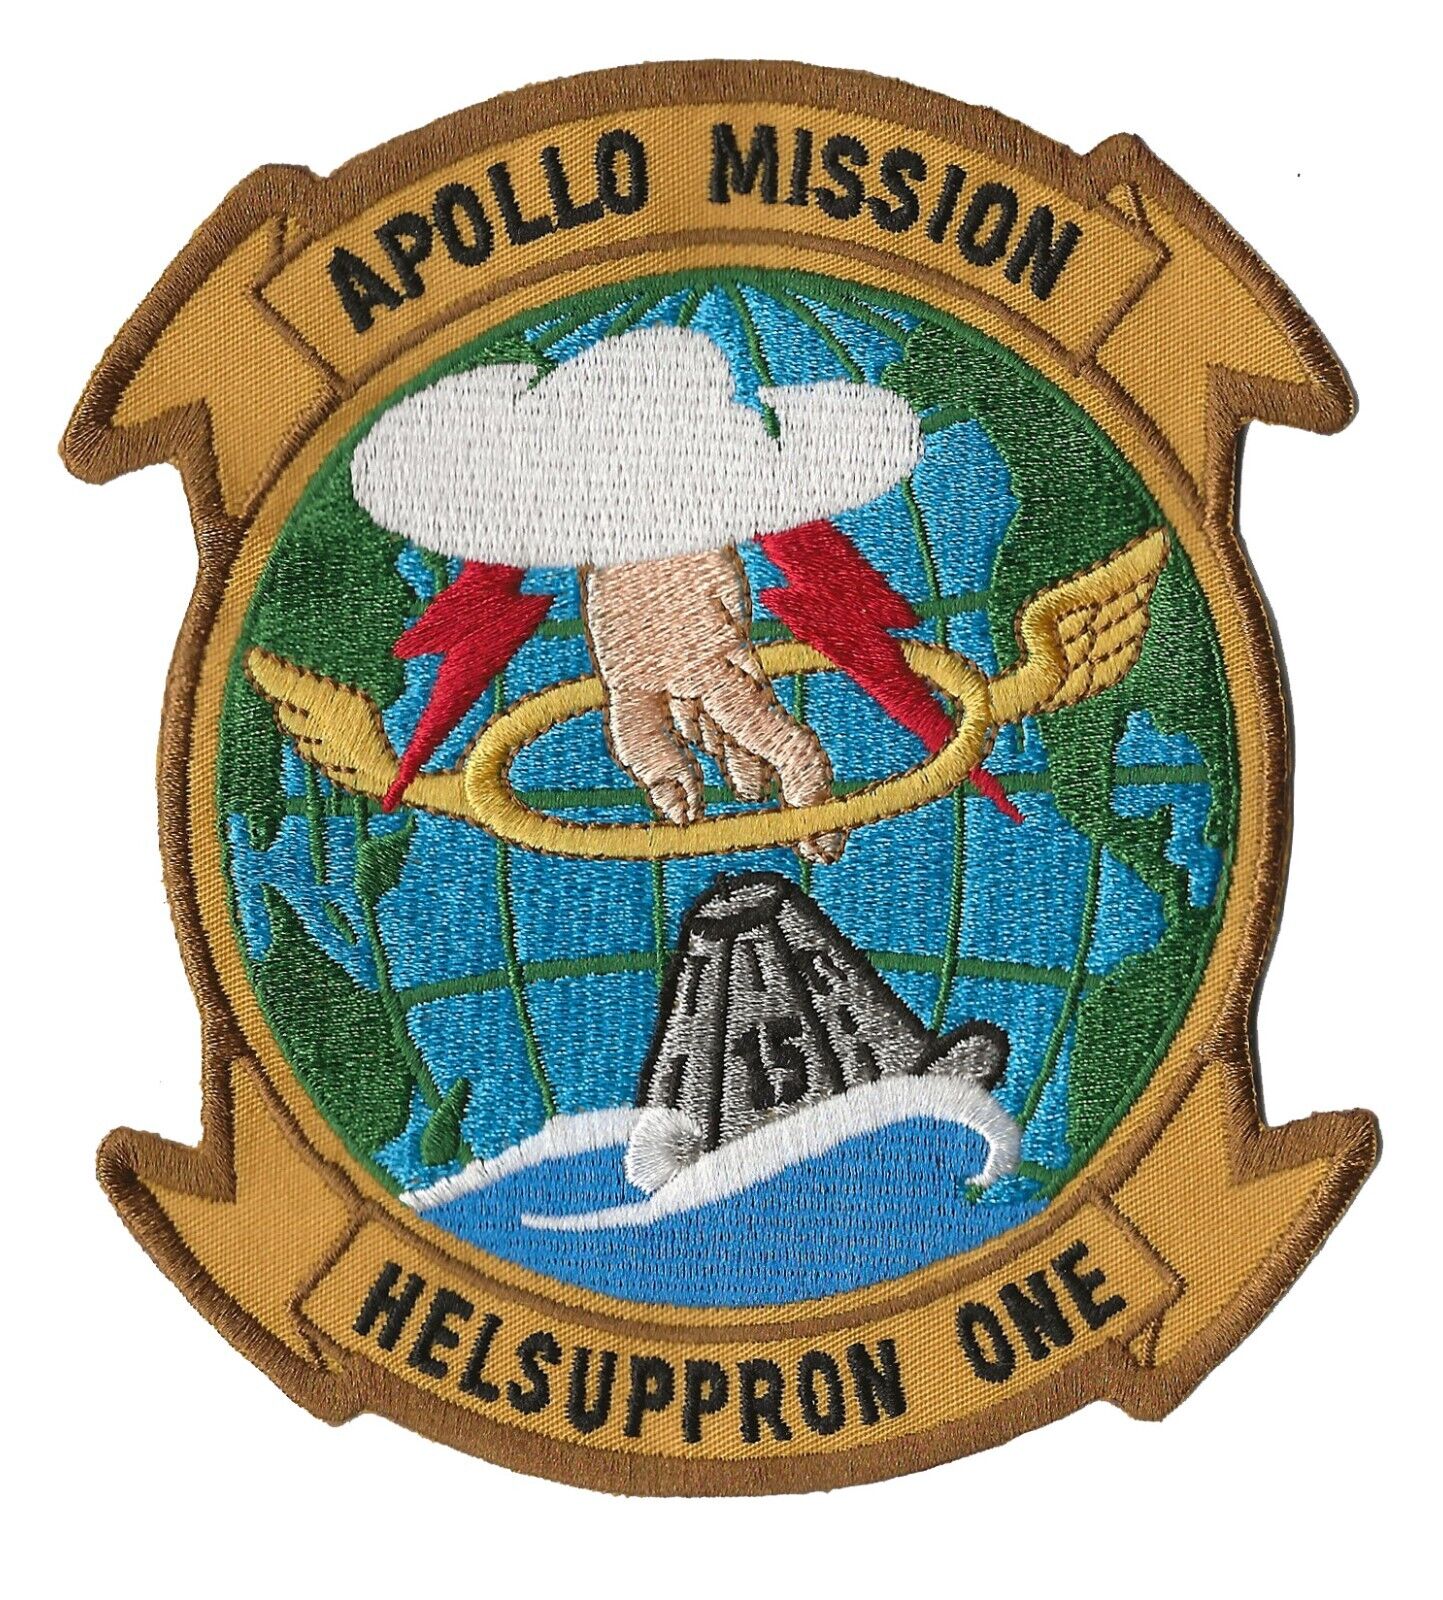 Apollo 15 HELSUPPRON US Navy helicopter NASA space recovery force ship patch